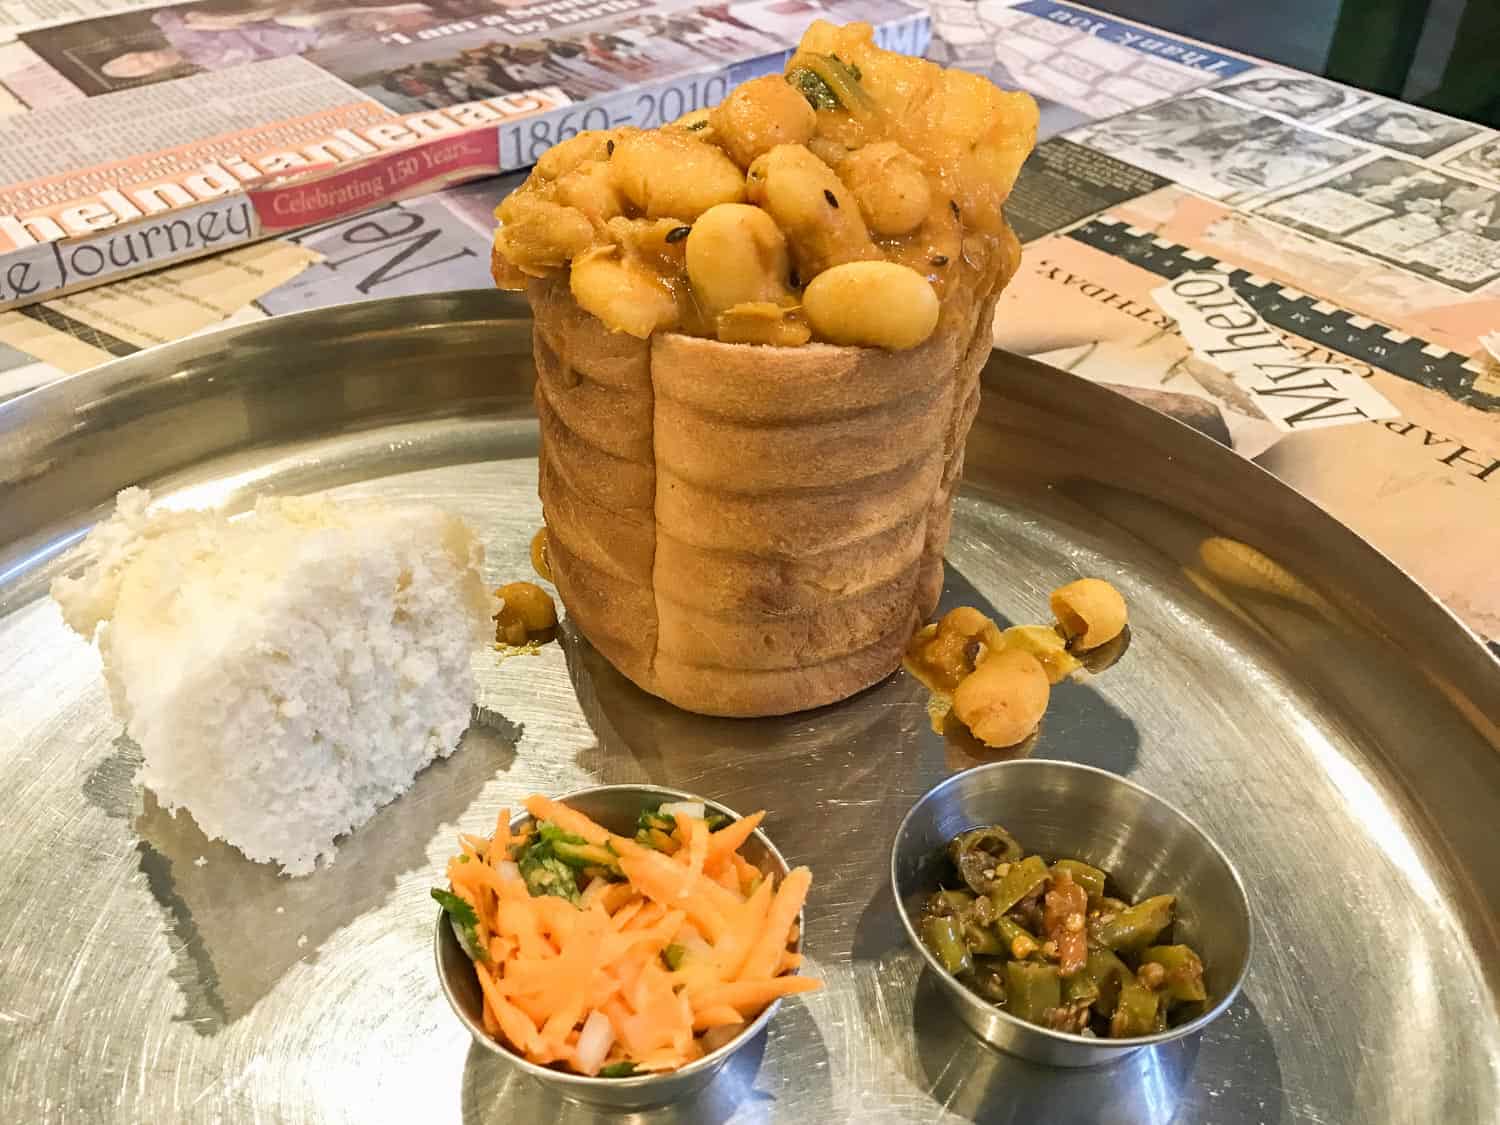 Bunny Chow at Thali in Johannesburg